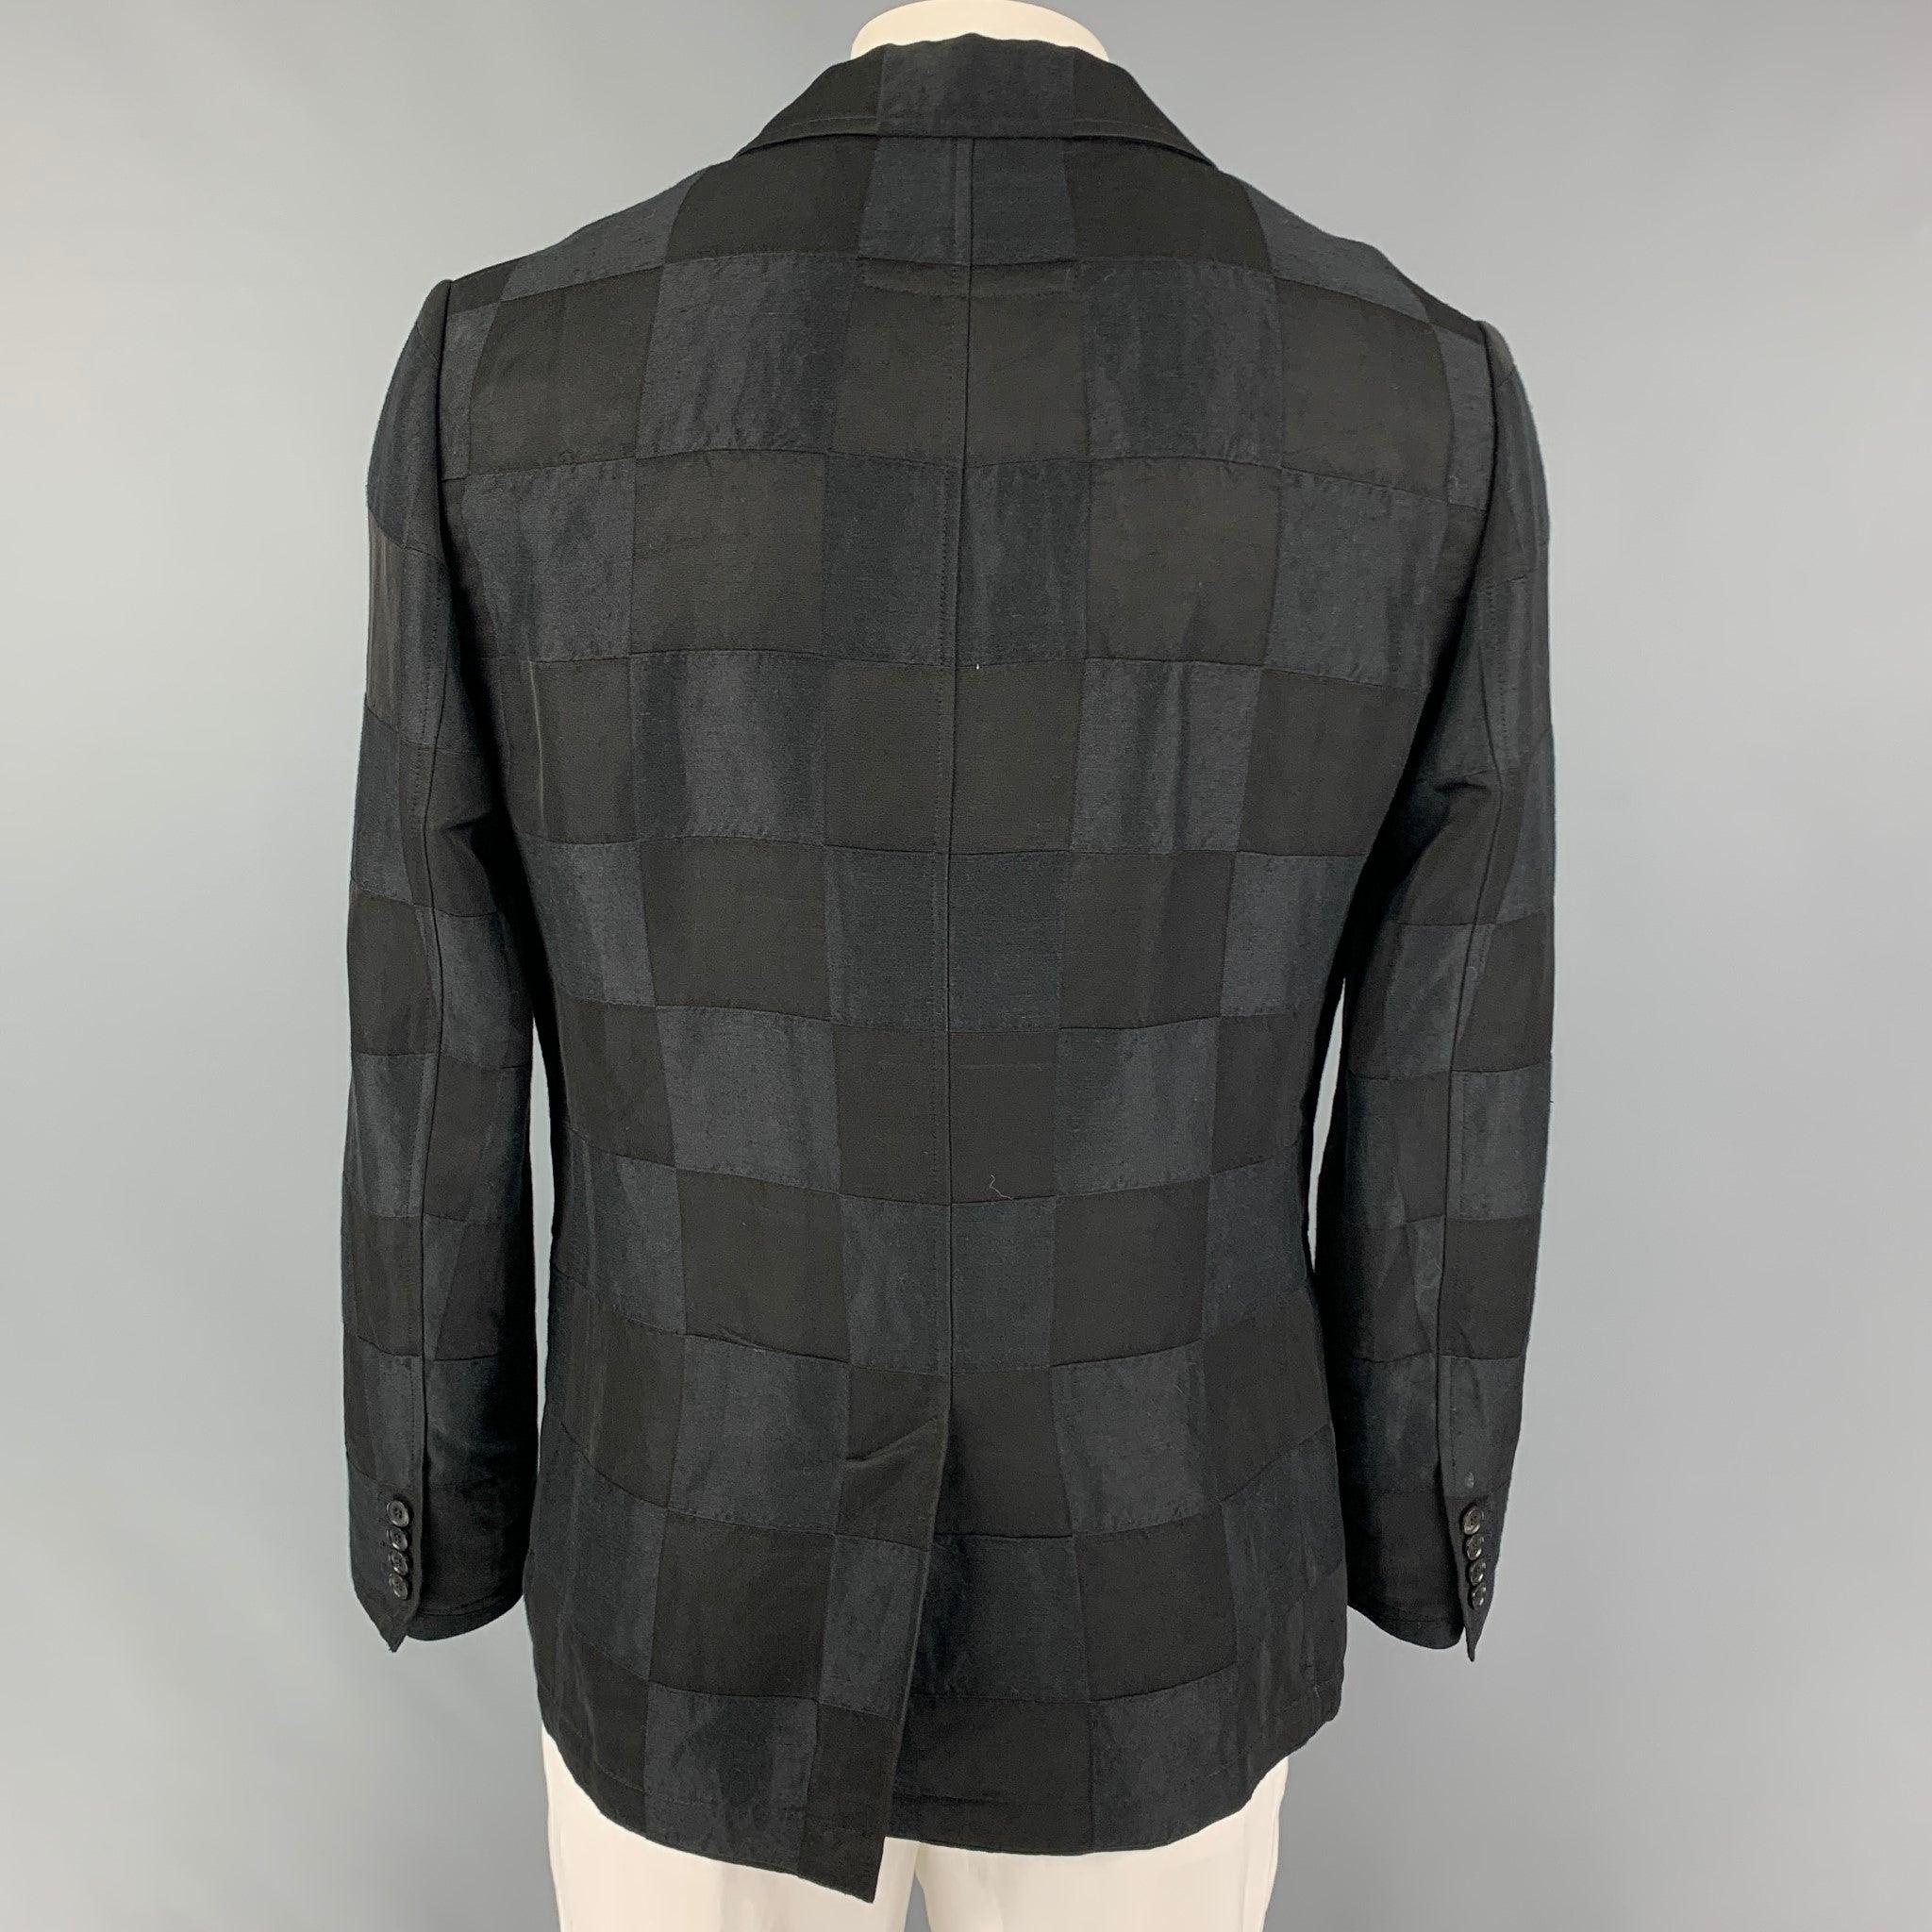 JOHN VARVATOS Size 42 Black Checkered Notch Lapel Sport Coat In Good Condition For Sale In San Francisco, CA